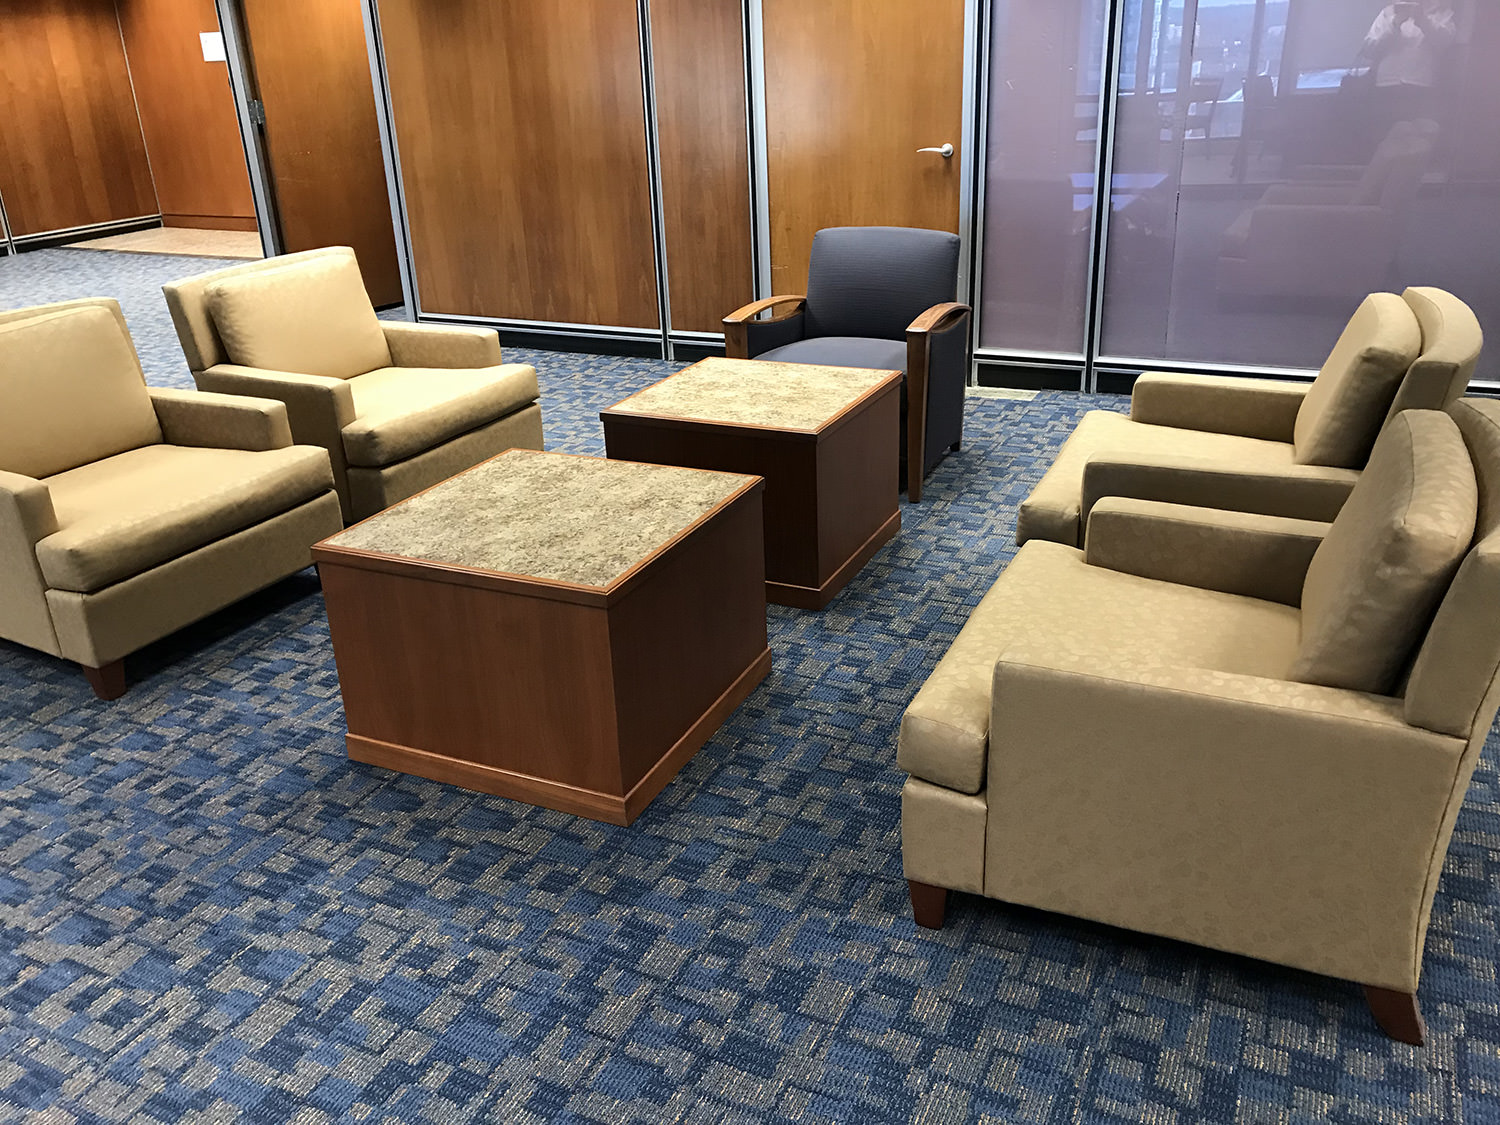 Used & Second Hand Office Furniture in Madison Wisconsin